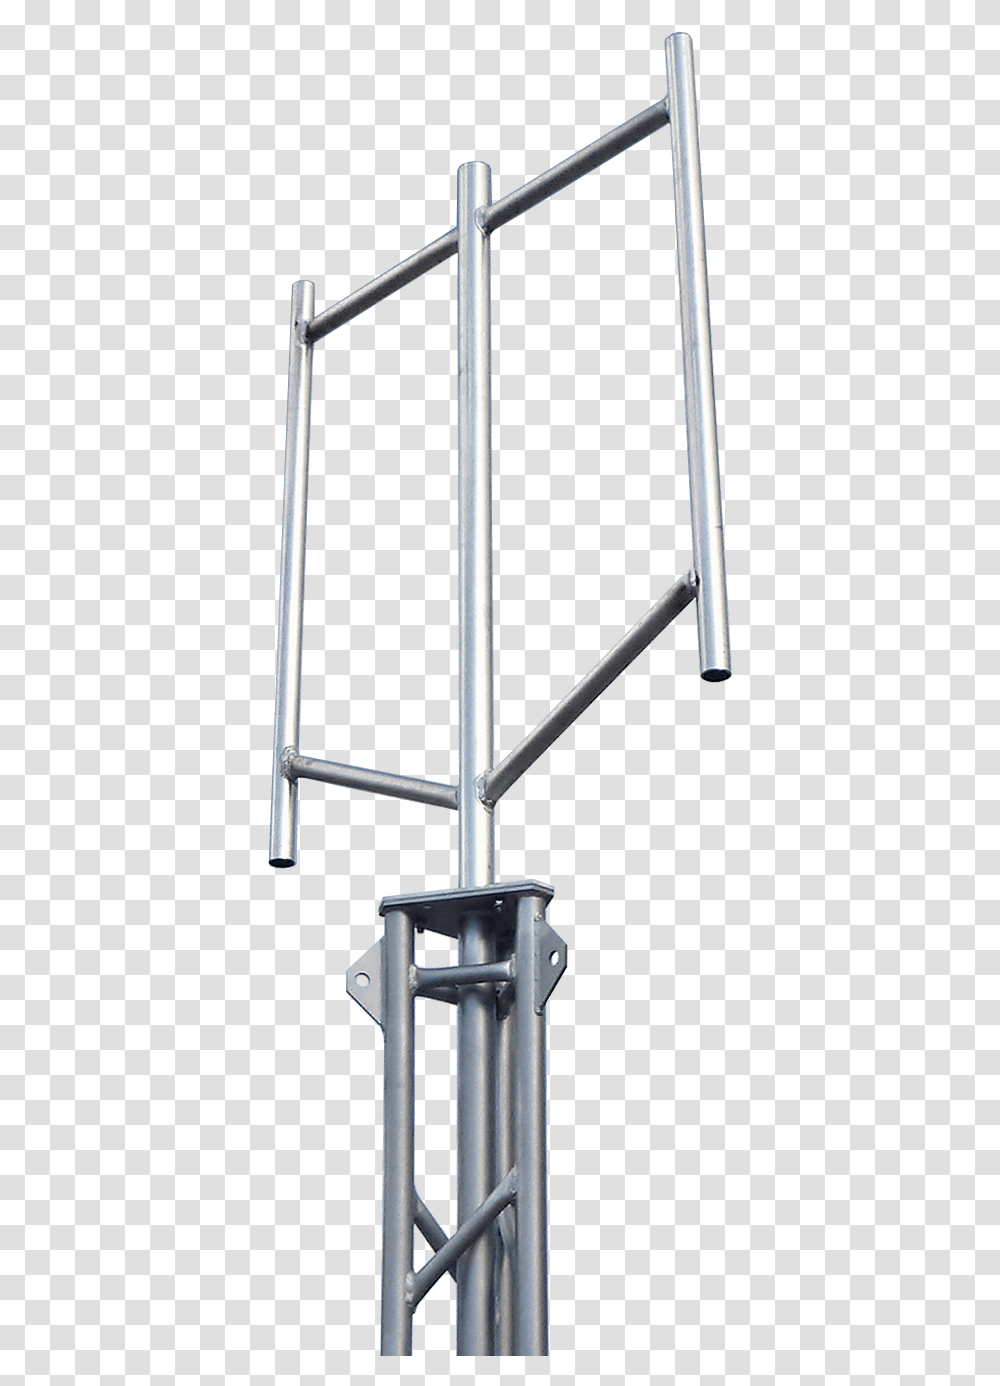 Aluminium Tower Headframe Twin Mount Handrail, Utility Pole, Banister, Stand, Shop Transparent Png